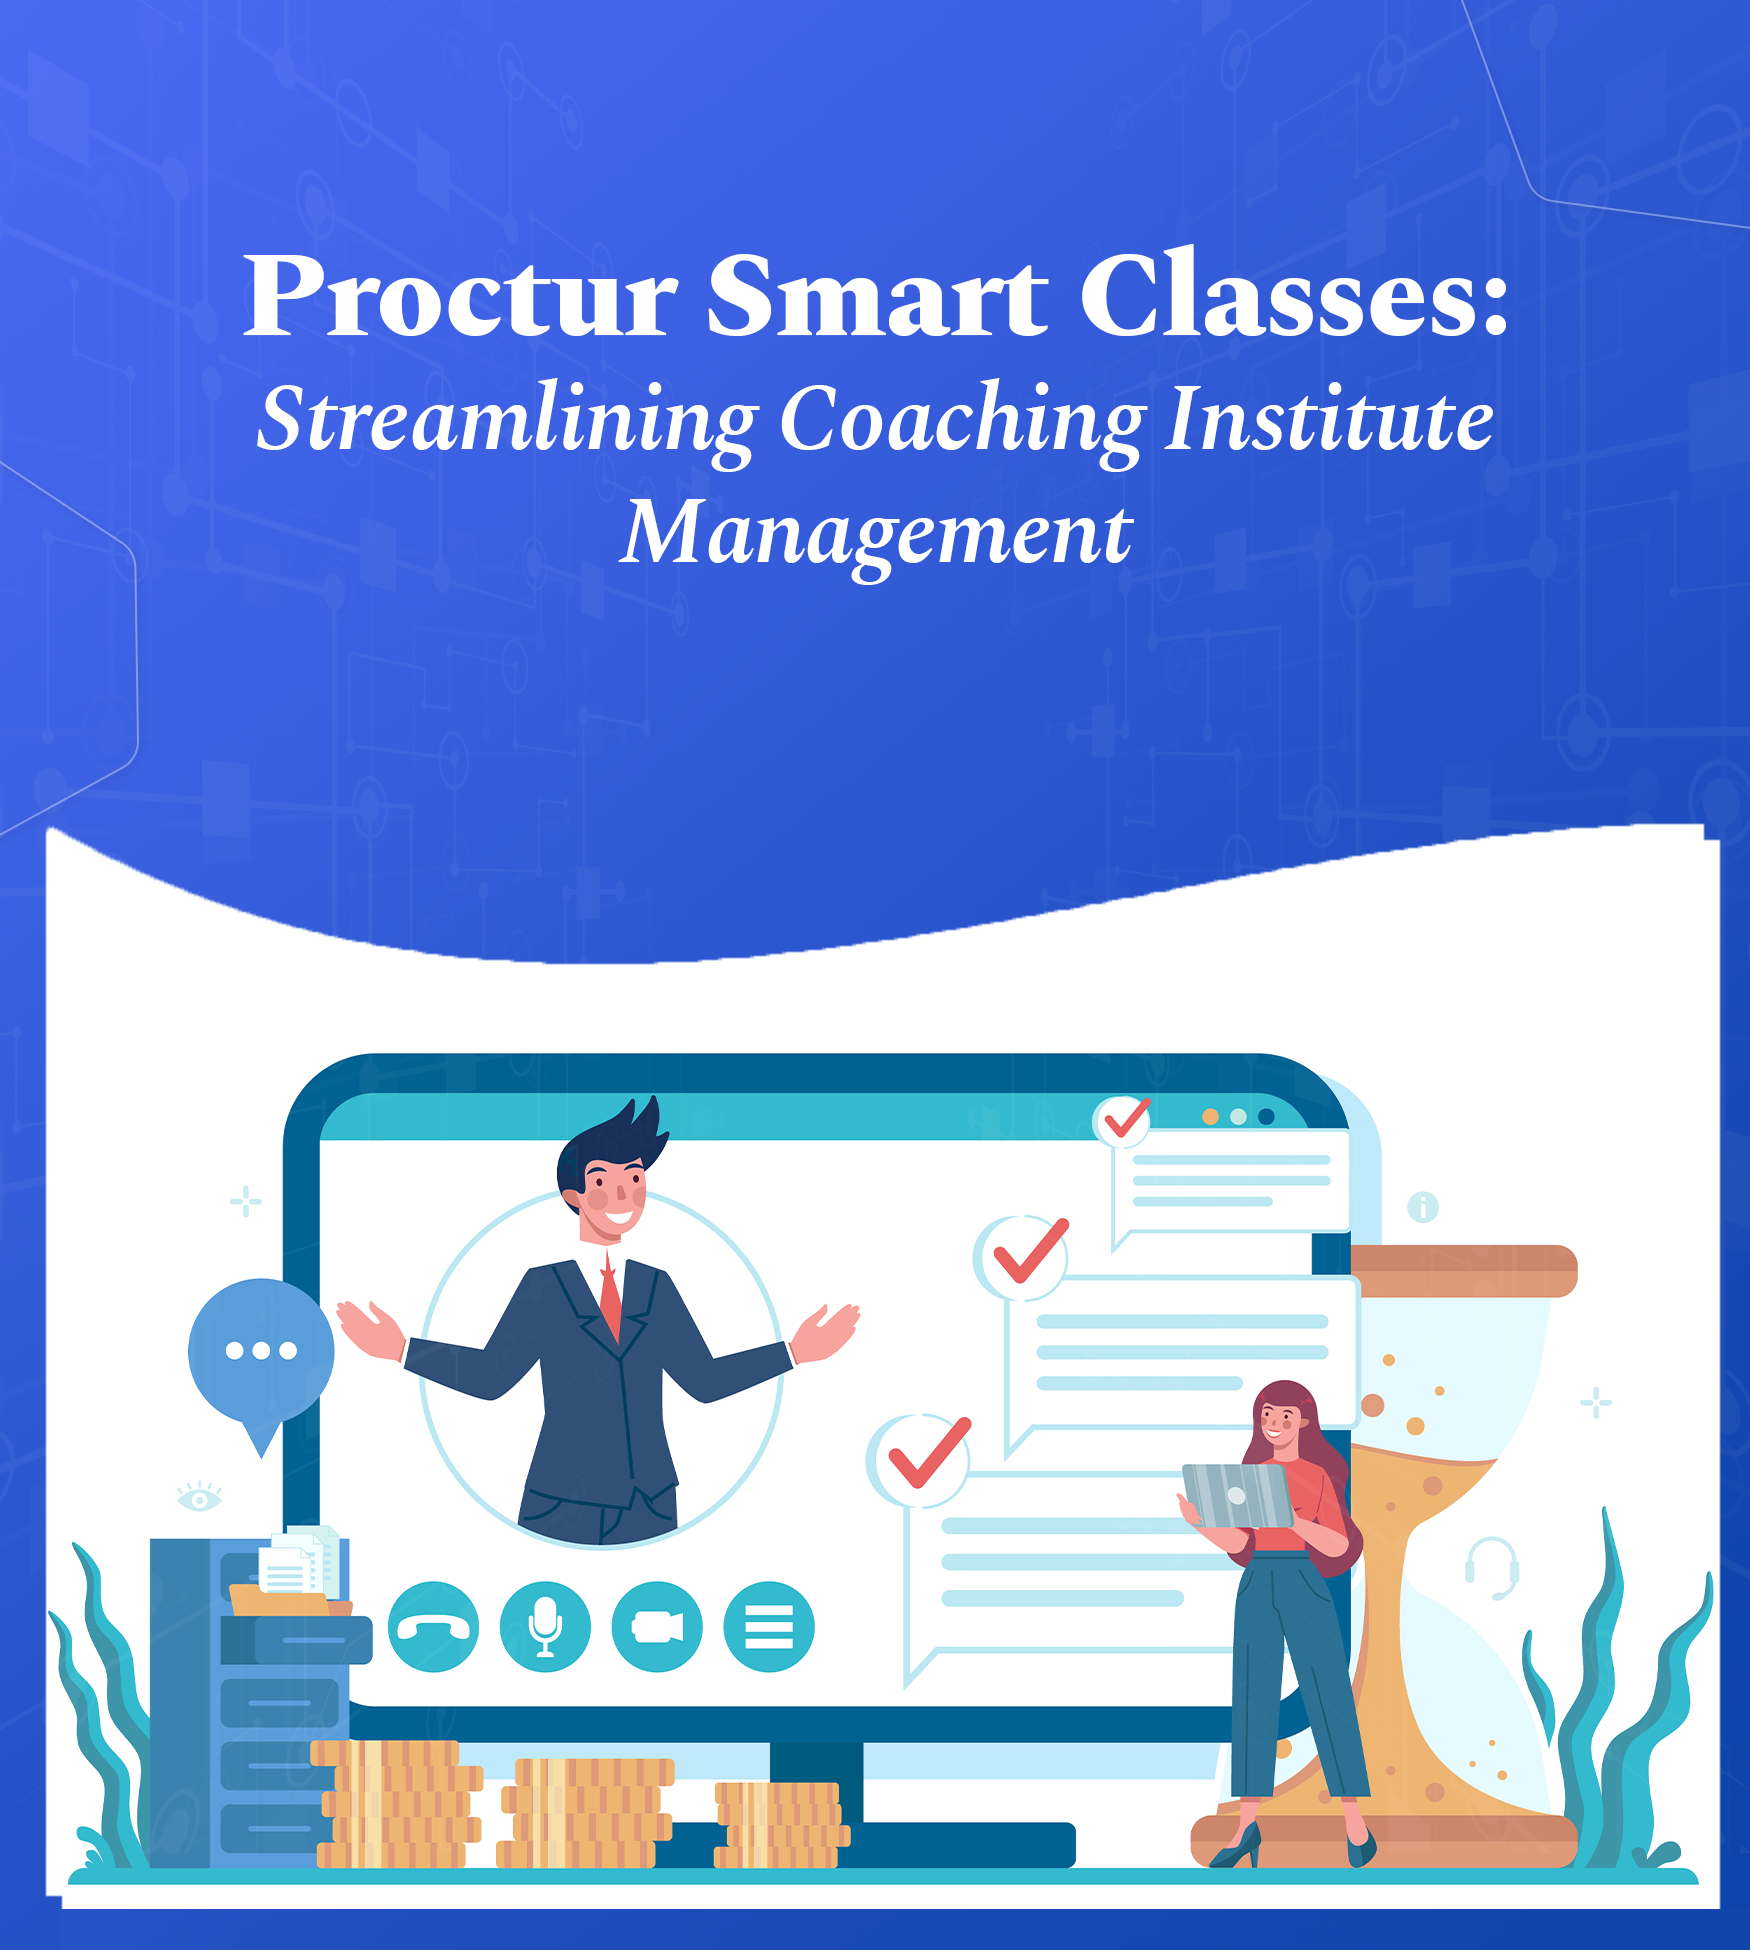 Coaching Institute Management Software for Smart Classess